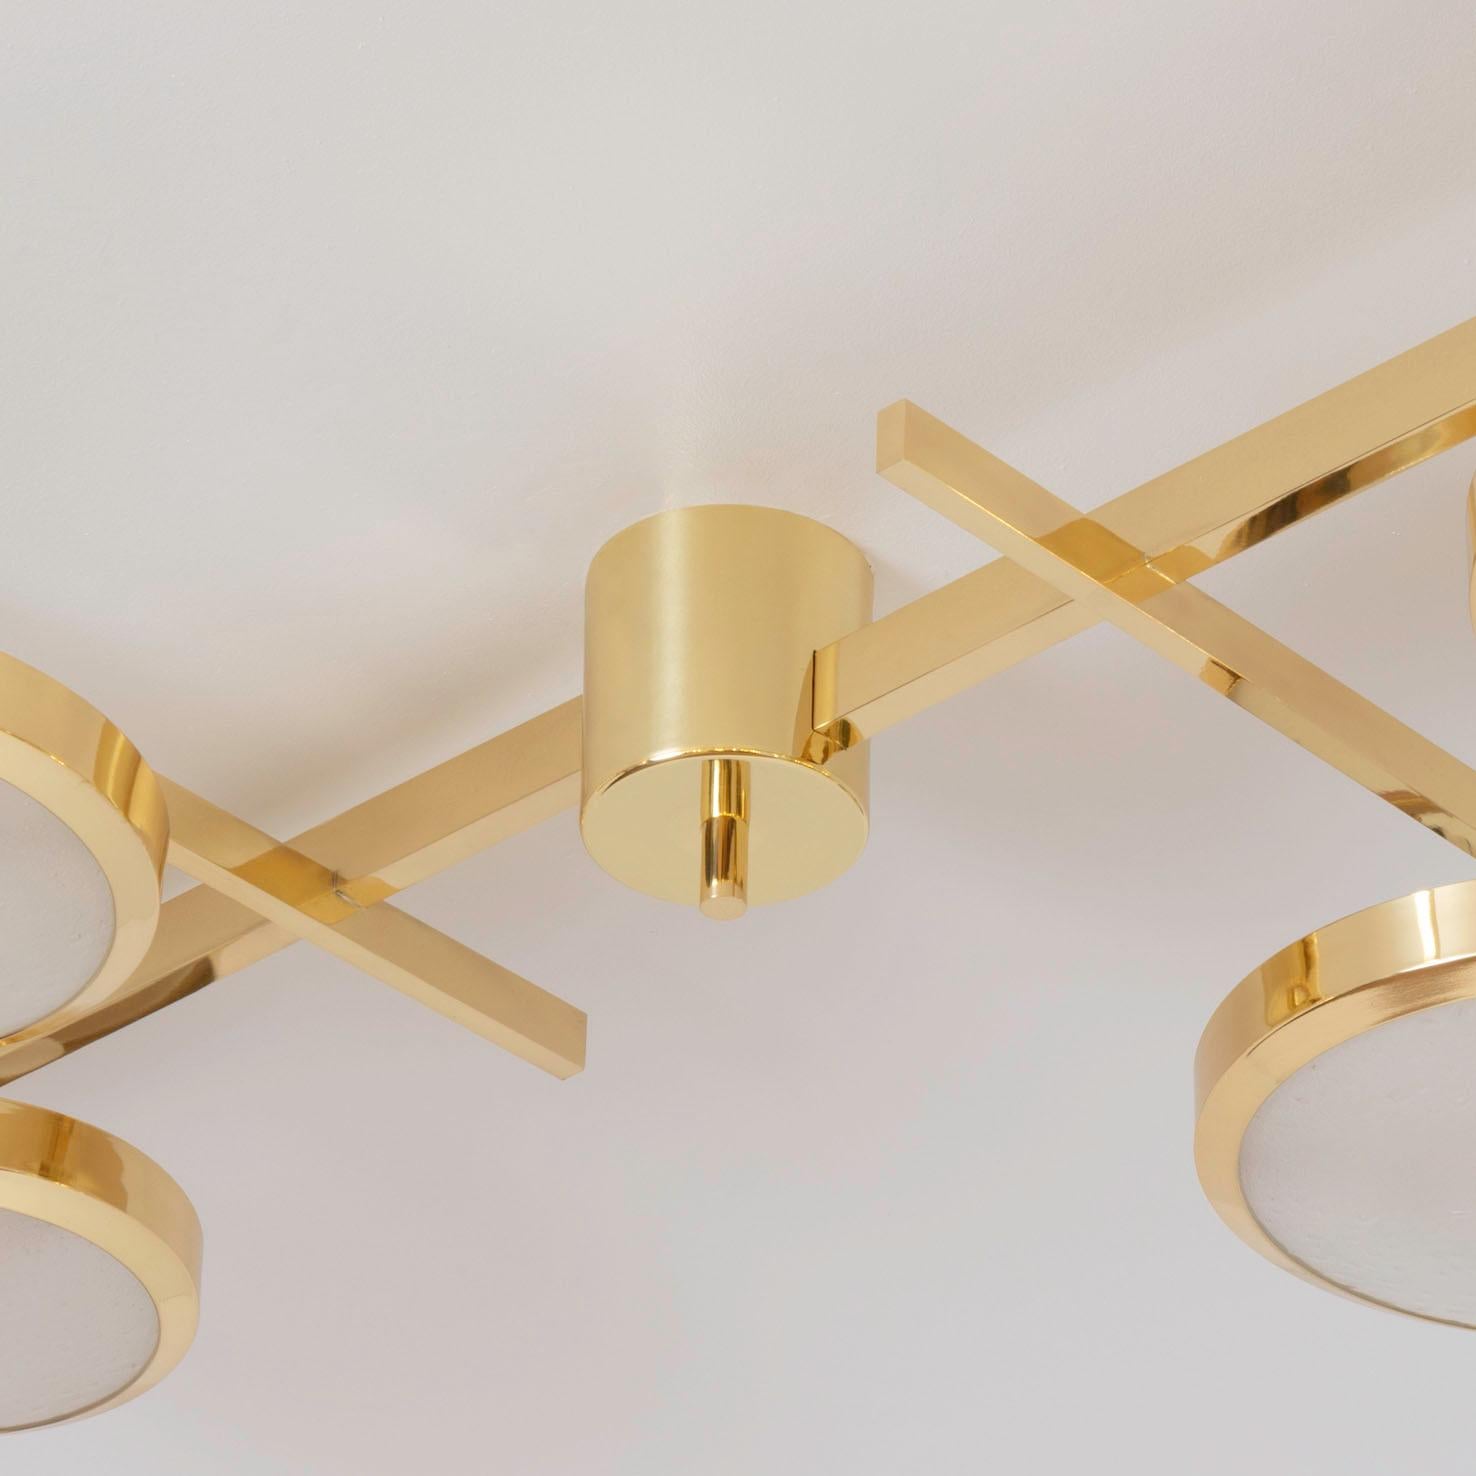 Contemporary Tetrix Ceiling Light by Gaspare Asaro - Polished Brass Finish For Sale